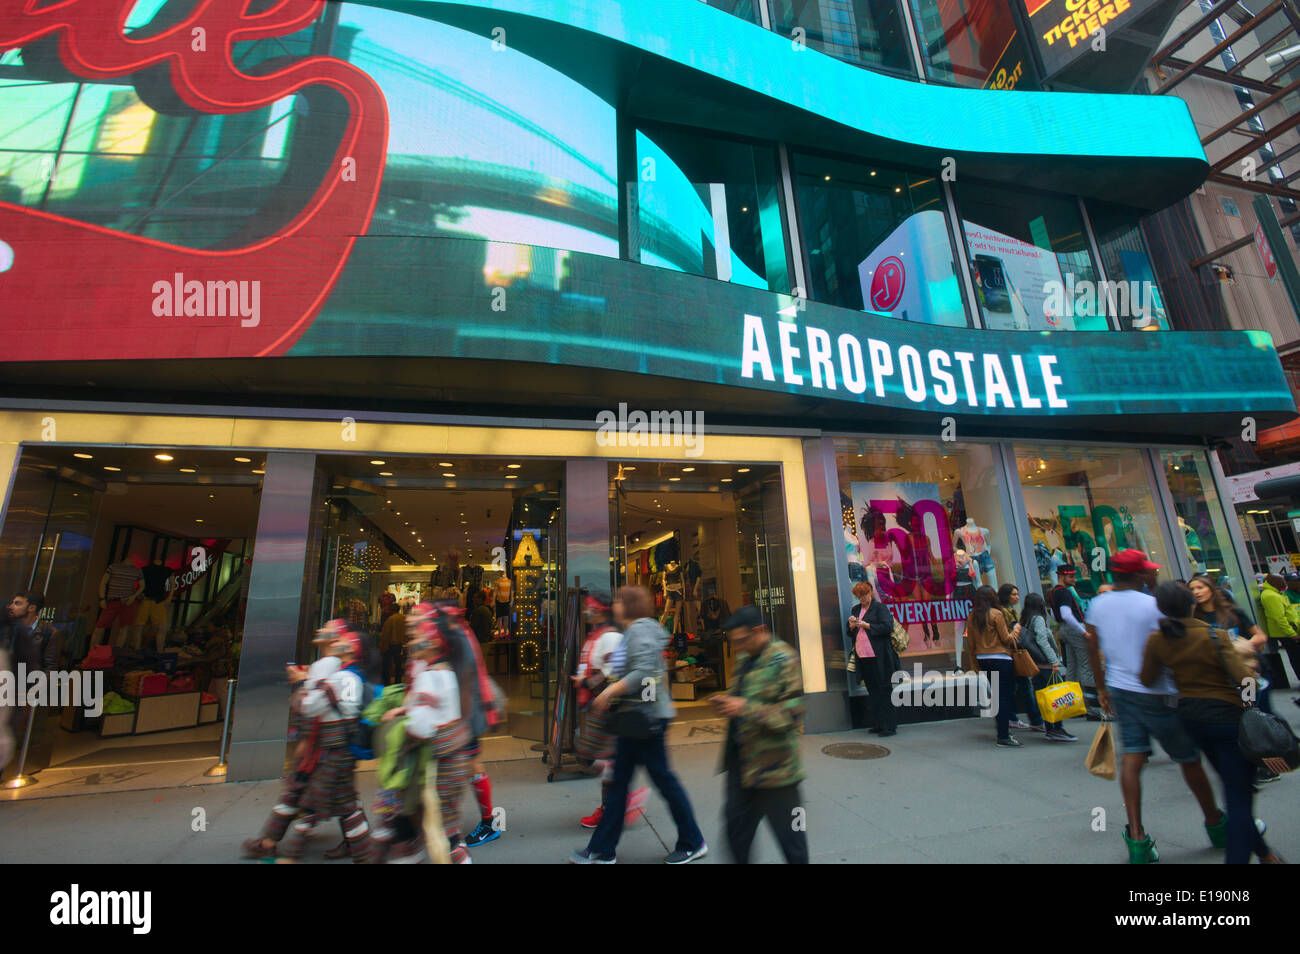 An Aeropostale store in Times Square in New York Stock Photo